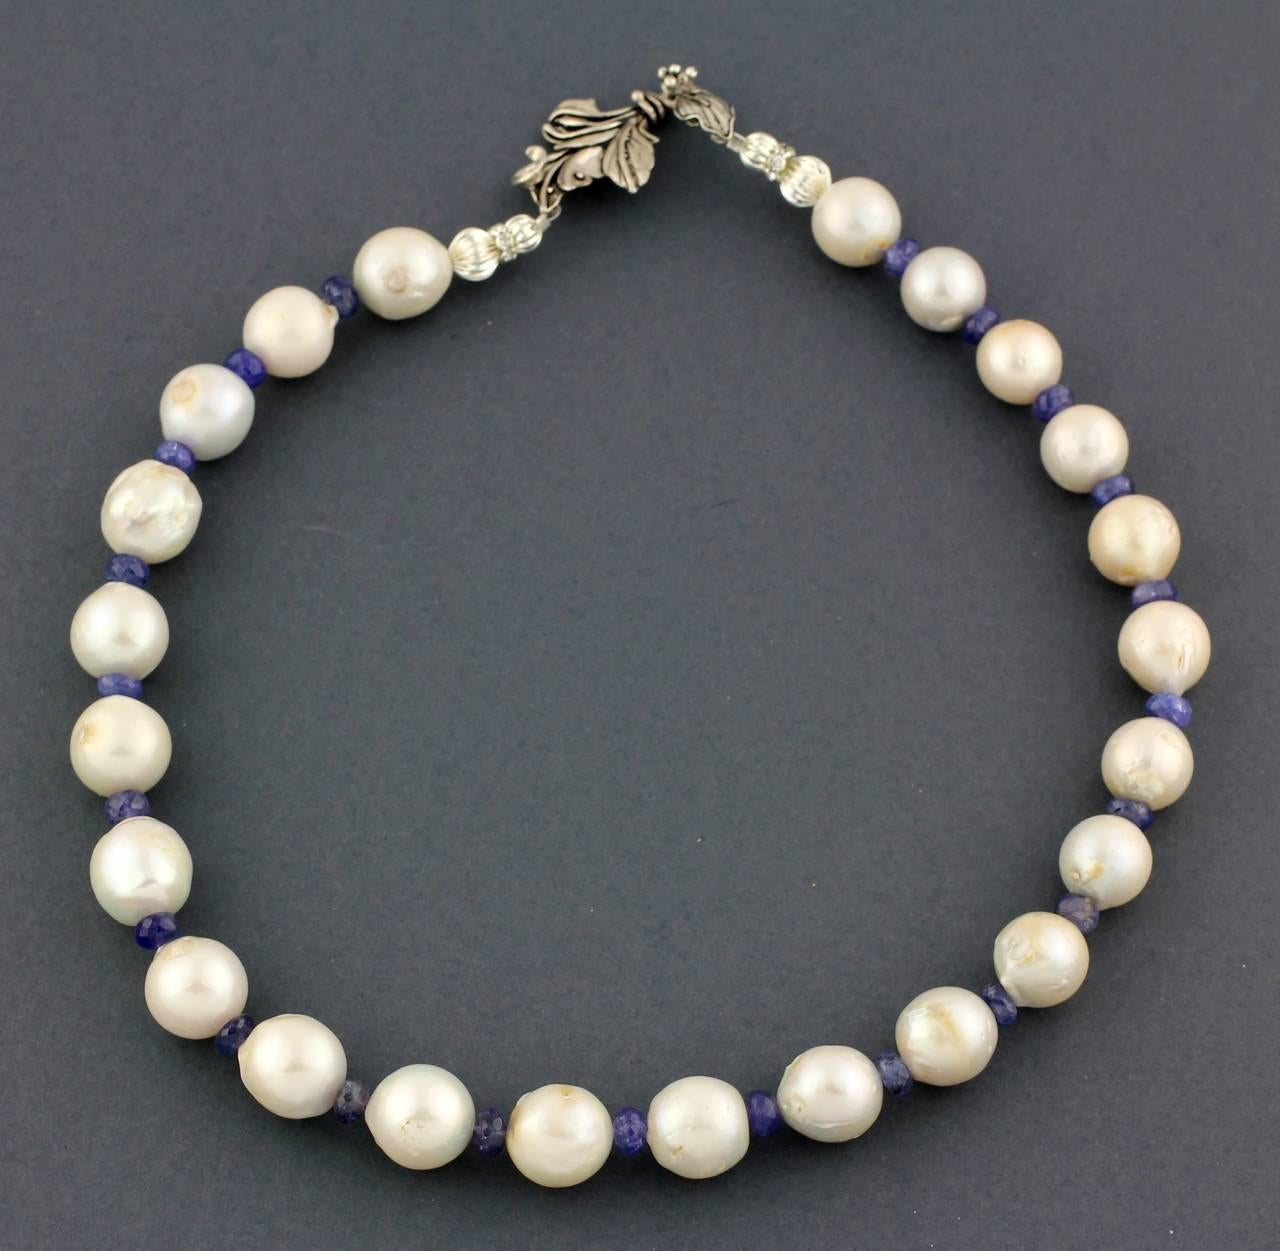 This is a necklace of large, slightly lumpy round magnificent White Tahitian Pearls enhanced with accents of bright blue Tanzanite rondelles.  It's a pleasing length of 20.5 inches and the pearls are approximately 15mm.  The clasp is a lovely